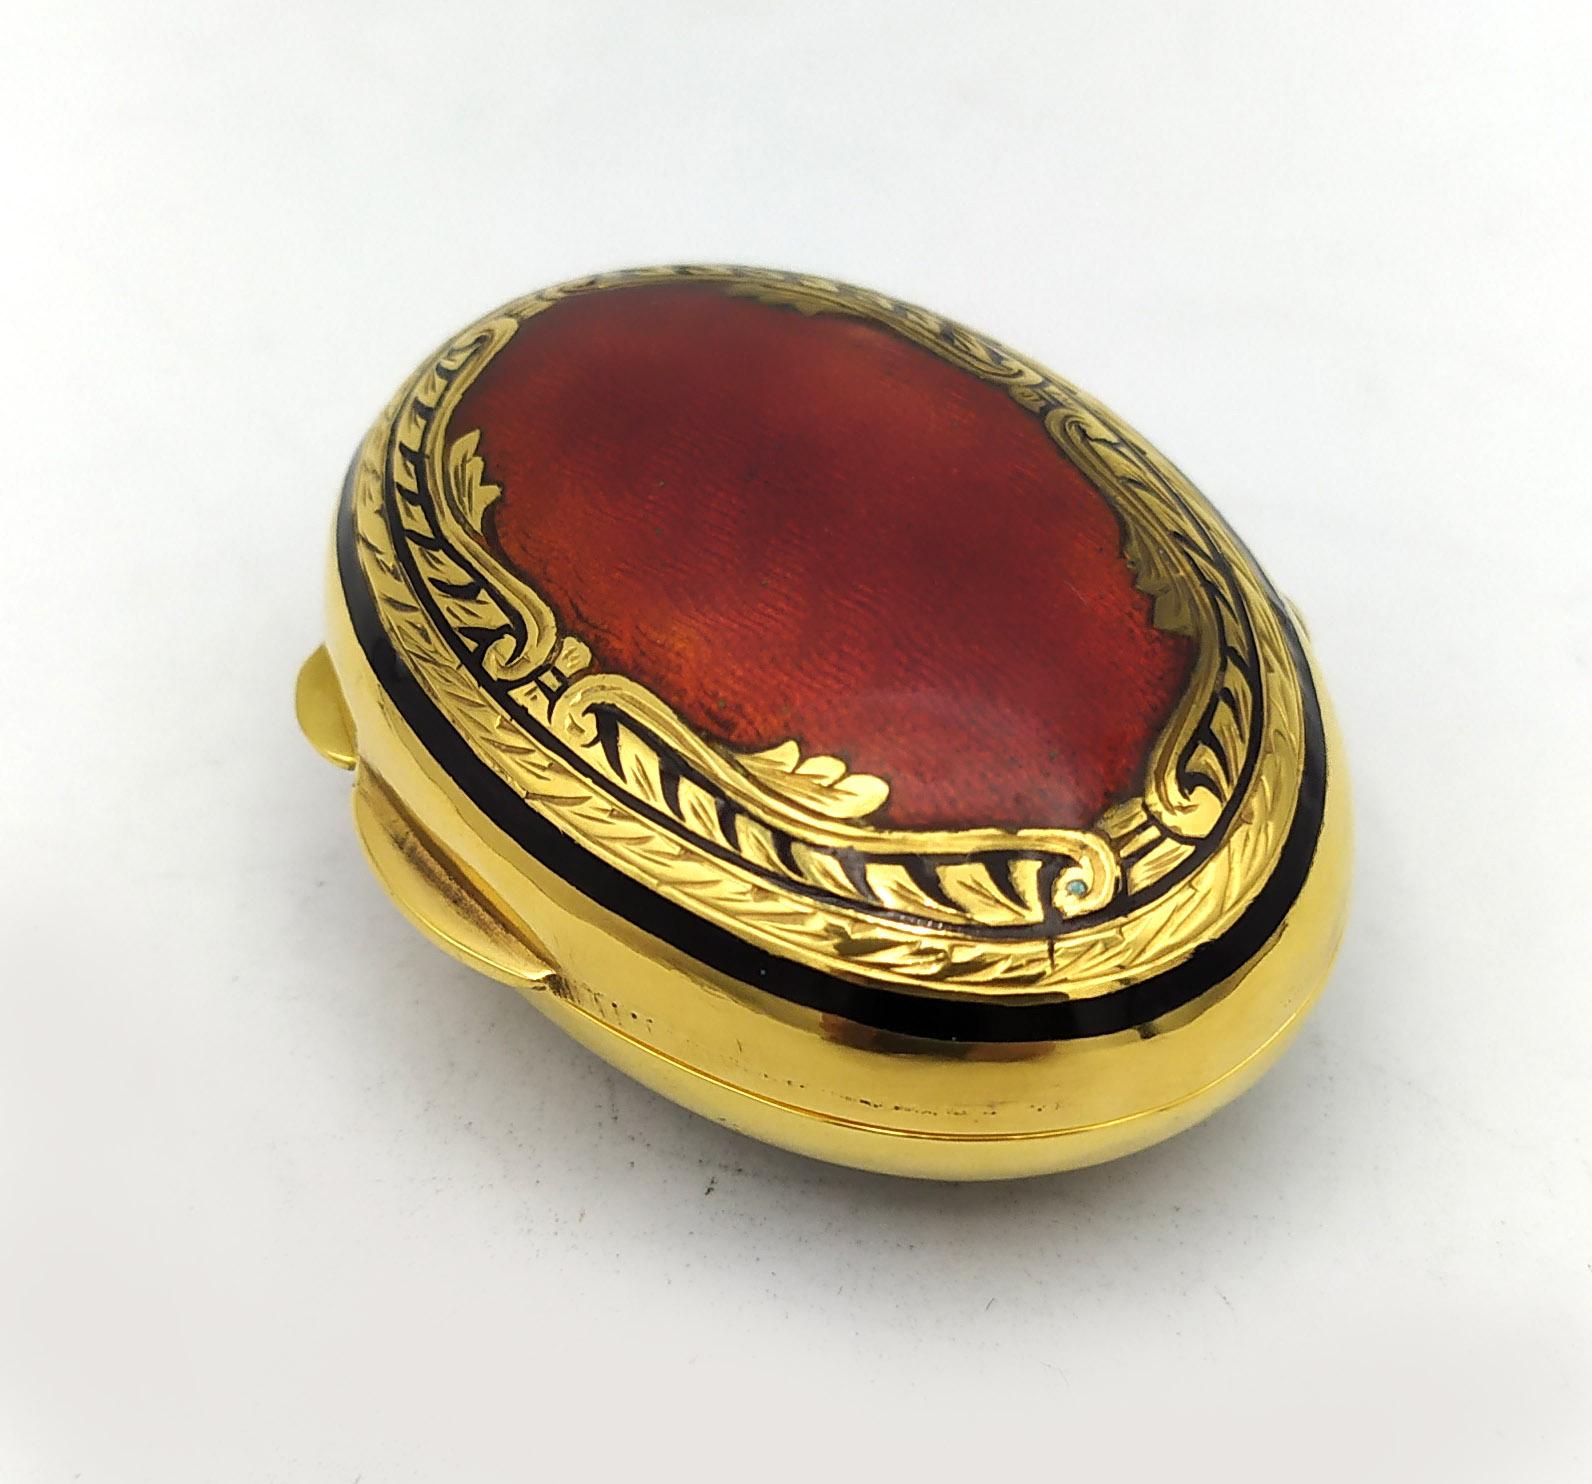 Domed oval pillbox in 925/1000 sterling silver gold plated with translucent fired enamels on guillochè, top and bottom, with fine hand-engravings. Viennese Art Nouveau style second half of the 19th century. Measure cm. 3.8 x 5.2 x 2.3. Weight gr. 59